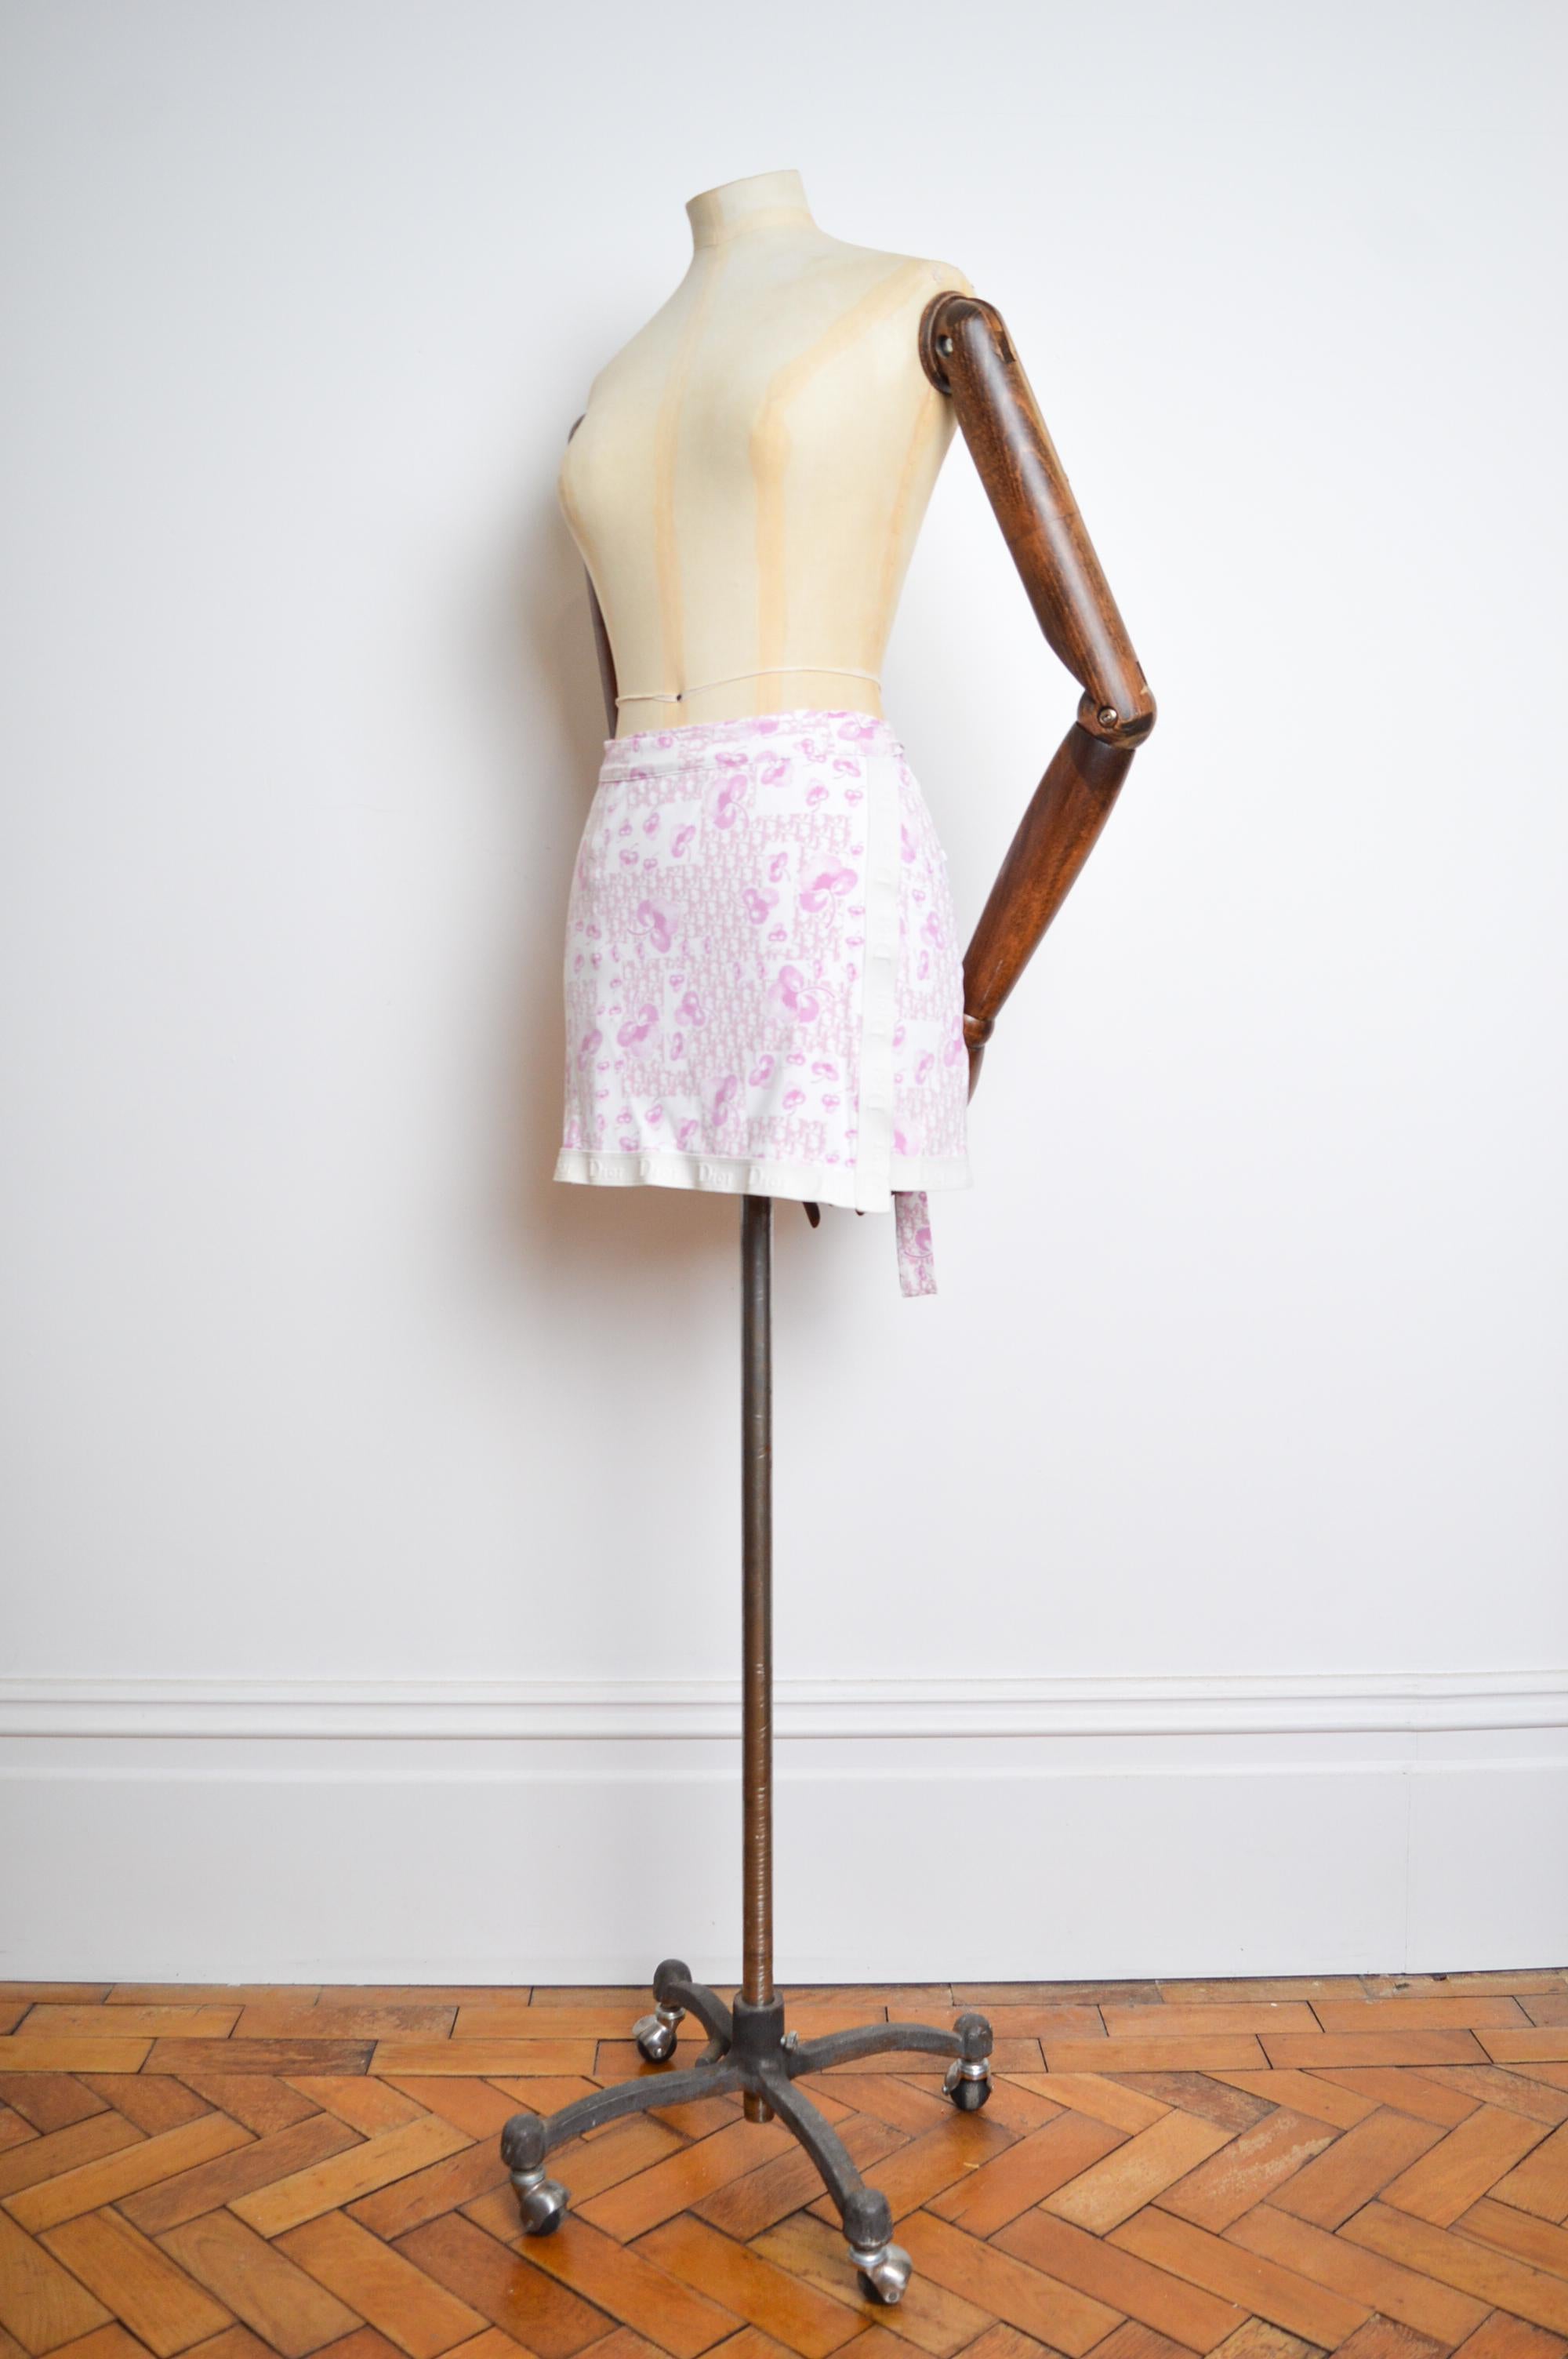 Spring / Summer 2005 Christian Dior by John Galliano Mini Wrap around skirt.

This iconic Vintage 2000's Mini skirt comes in the iconic 'Girly Trotter' print in a Pastel pink and white colour way.

MADE IN ITALY.

Measurements are provided in Inches